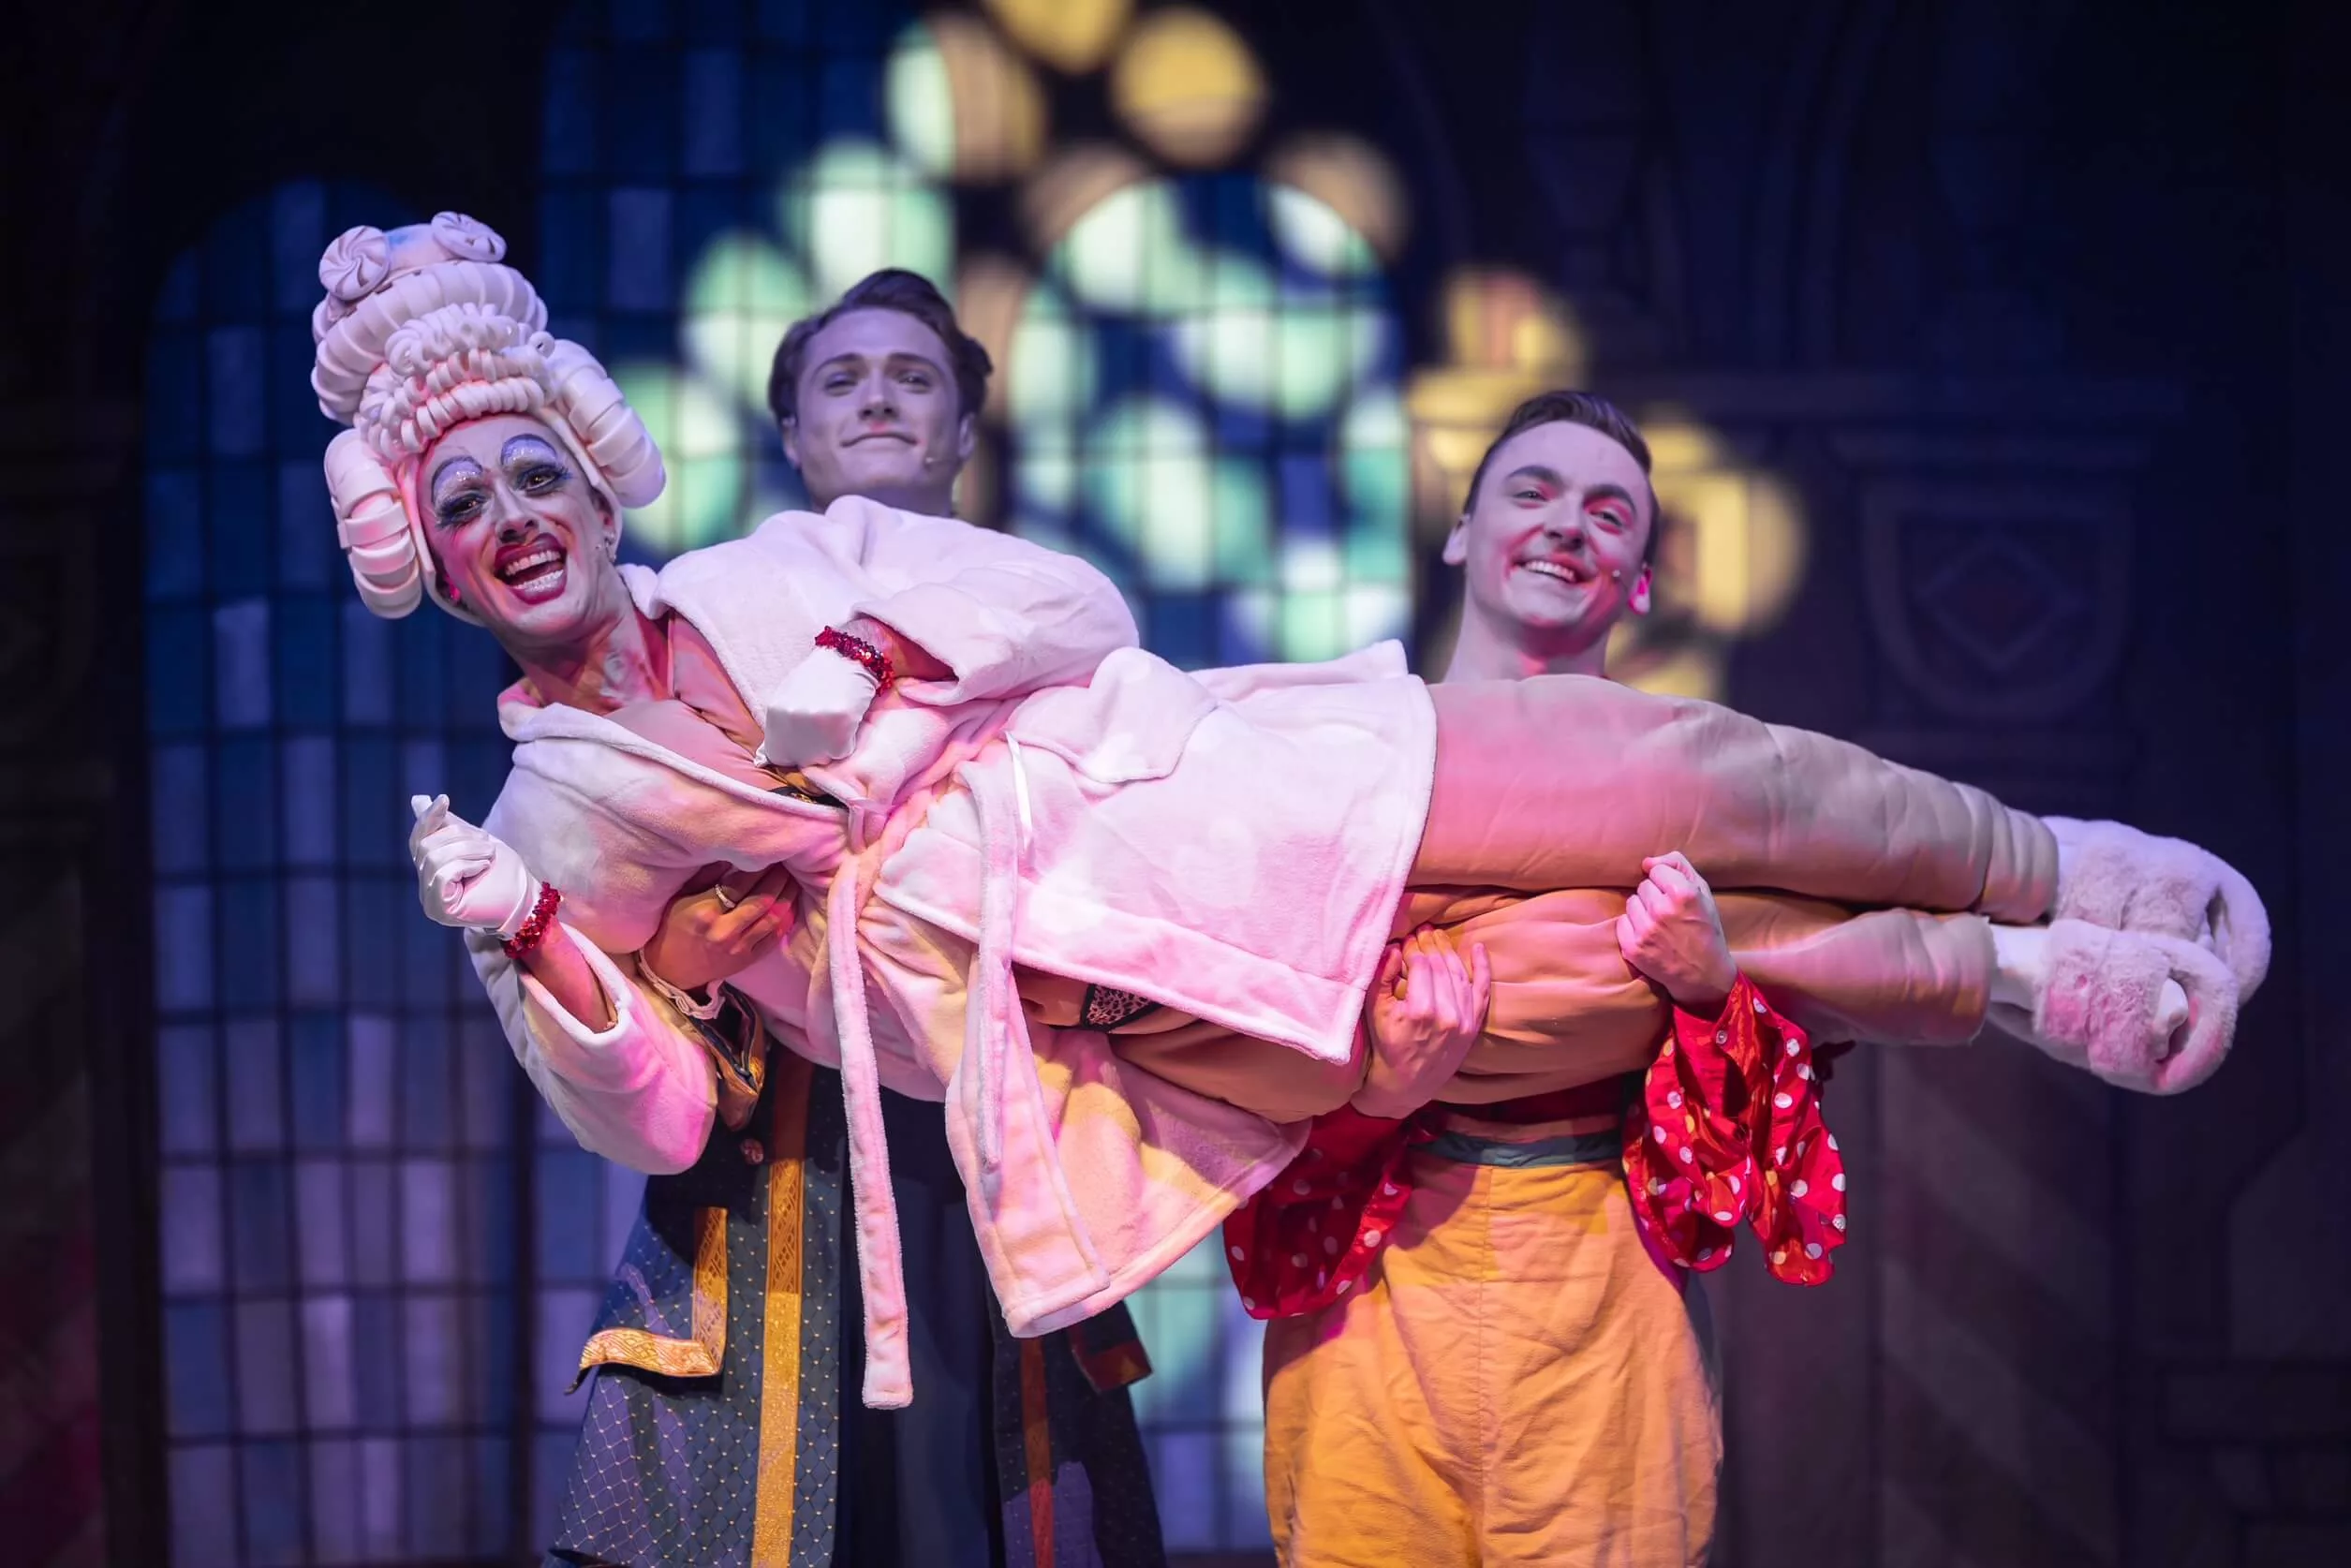 Professional performers on stage in the Ludlow Pantomime